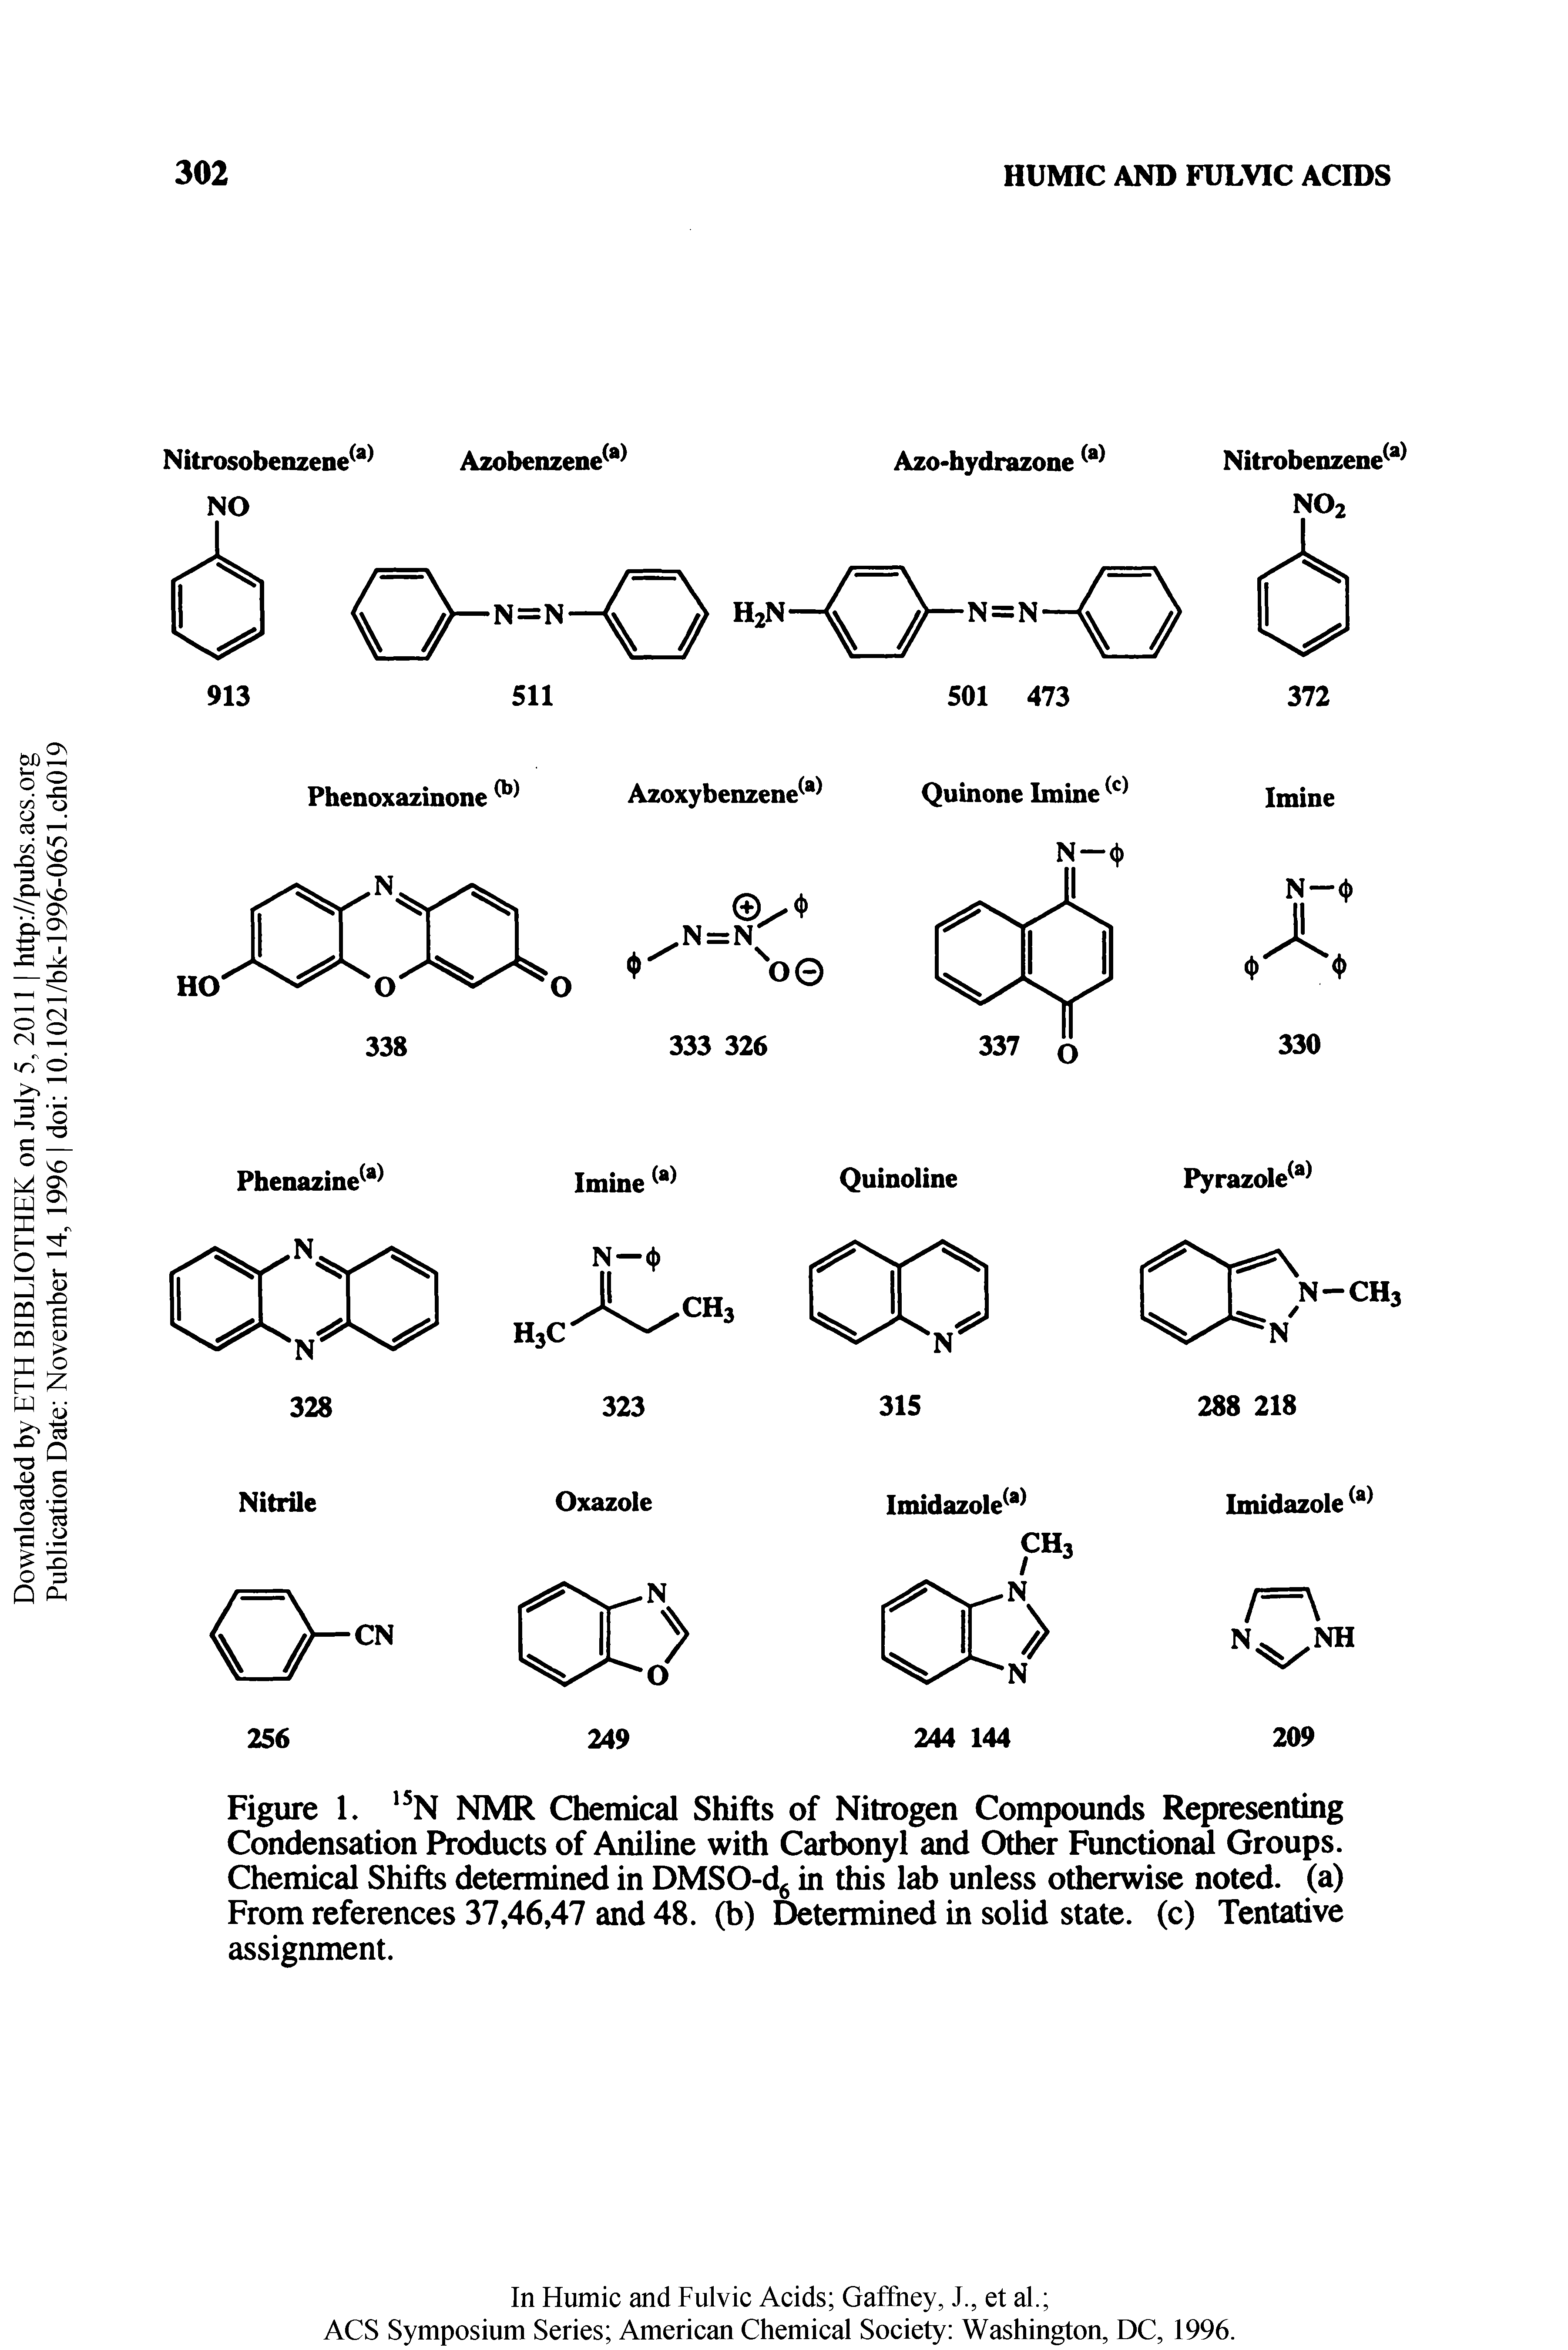 Figure L NMR Chemical Shifts of Nitrogen Compounds Representing Condensation Products of Aniline with Carbonyl and Other Functioned Groups. Chemical Shifts determined in DMSO-d in this lab unless otherwise noted, (a) From references 37,46,47 and 48. (b) Determined in solid state, (c) Tentative assignment.